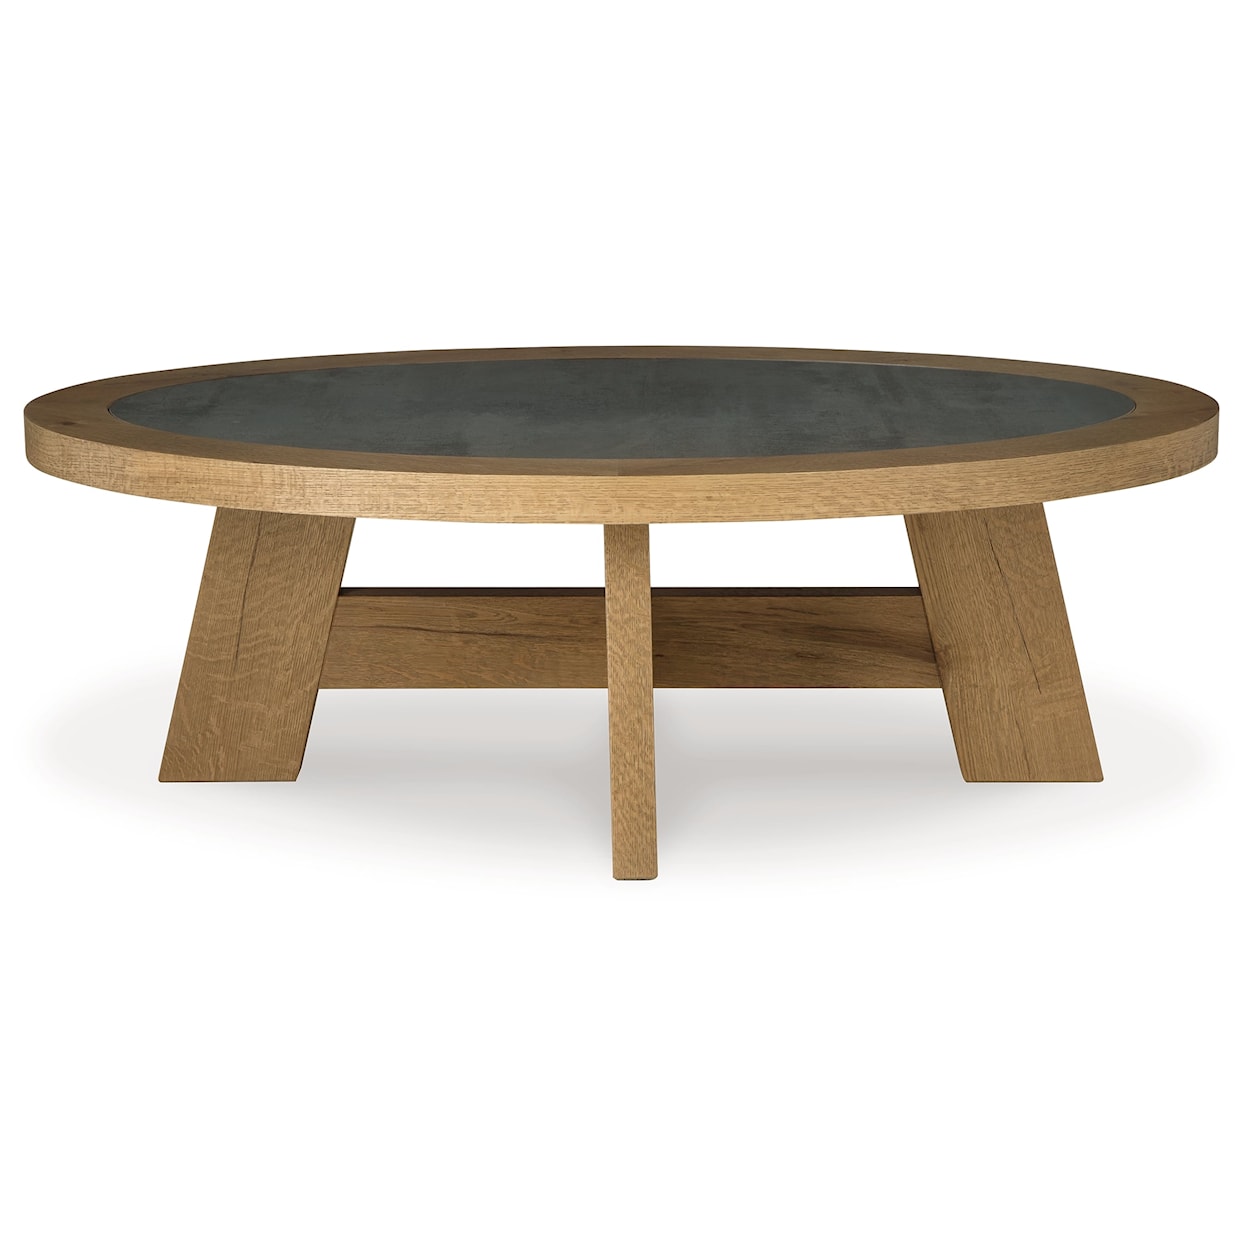 Benchcraft Brinstead Oval Cocktail Table